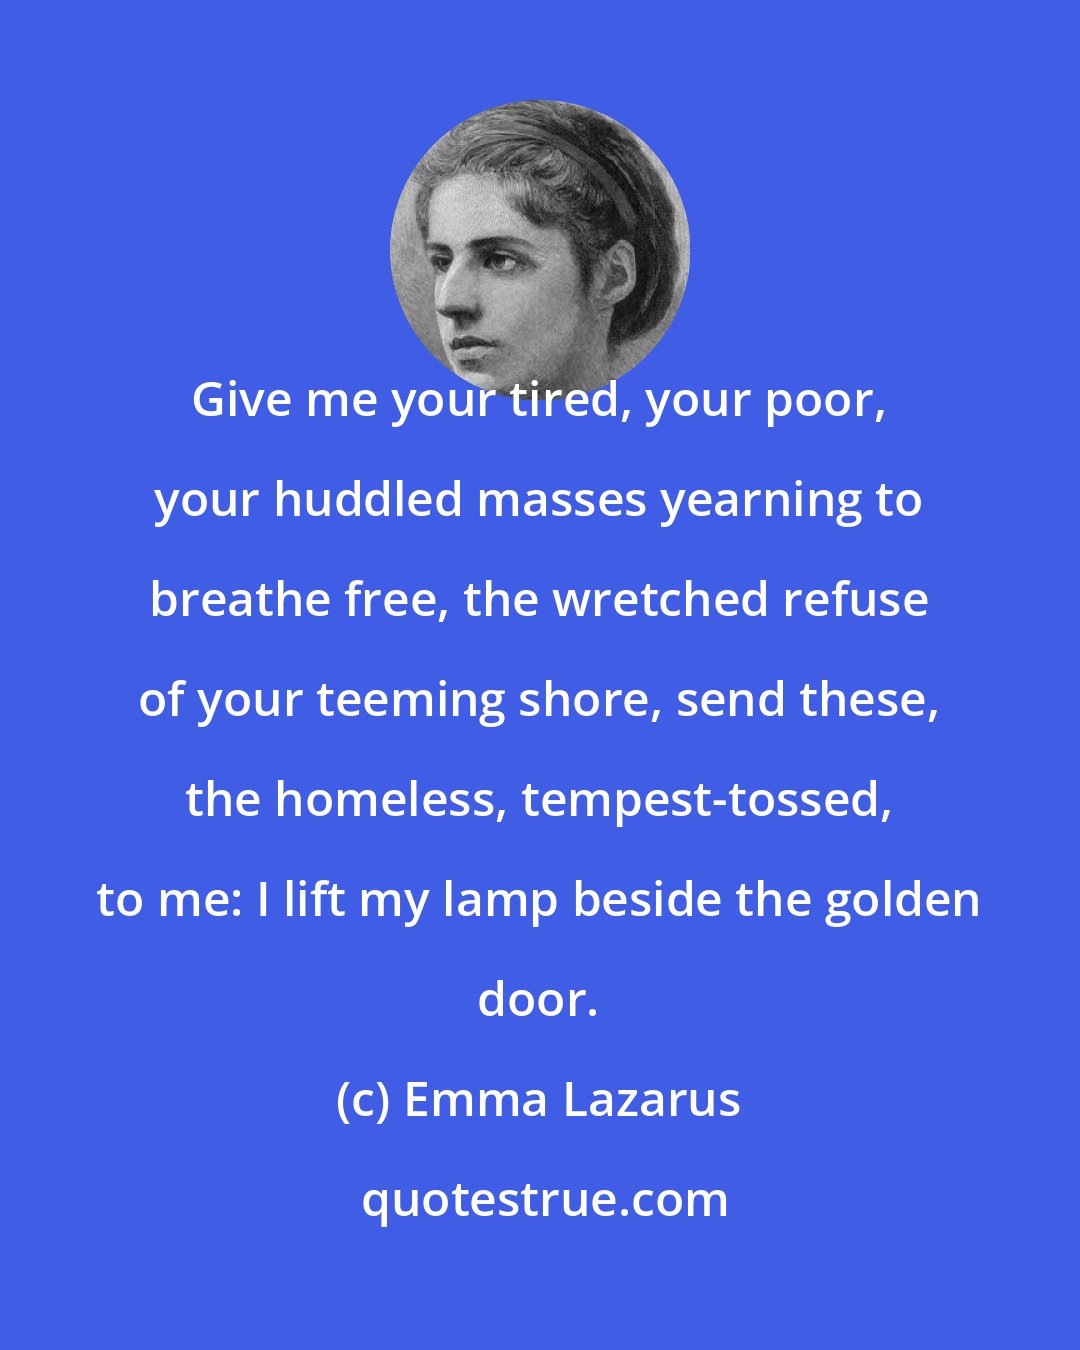 Emma Lazarus: Give me your tired, your poor, your huddled masses yearning to breathe free, the wretched refuse of your teeming shore, send these, the homeless, tempest-tossed, to me: I lift my lamp beside the golden door.